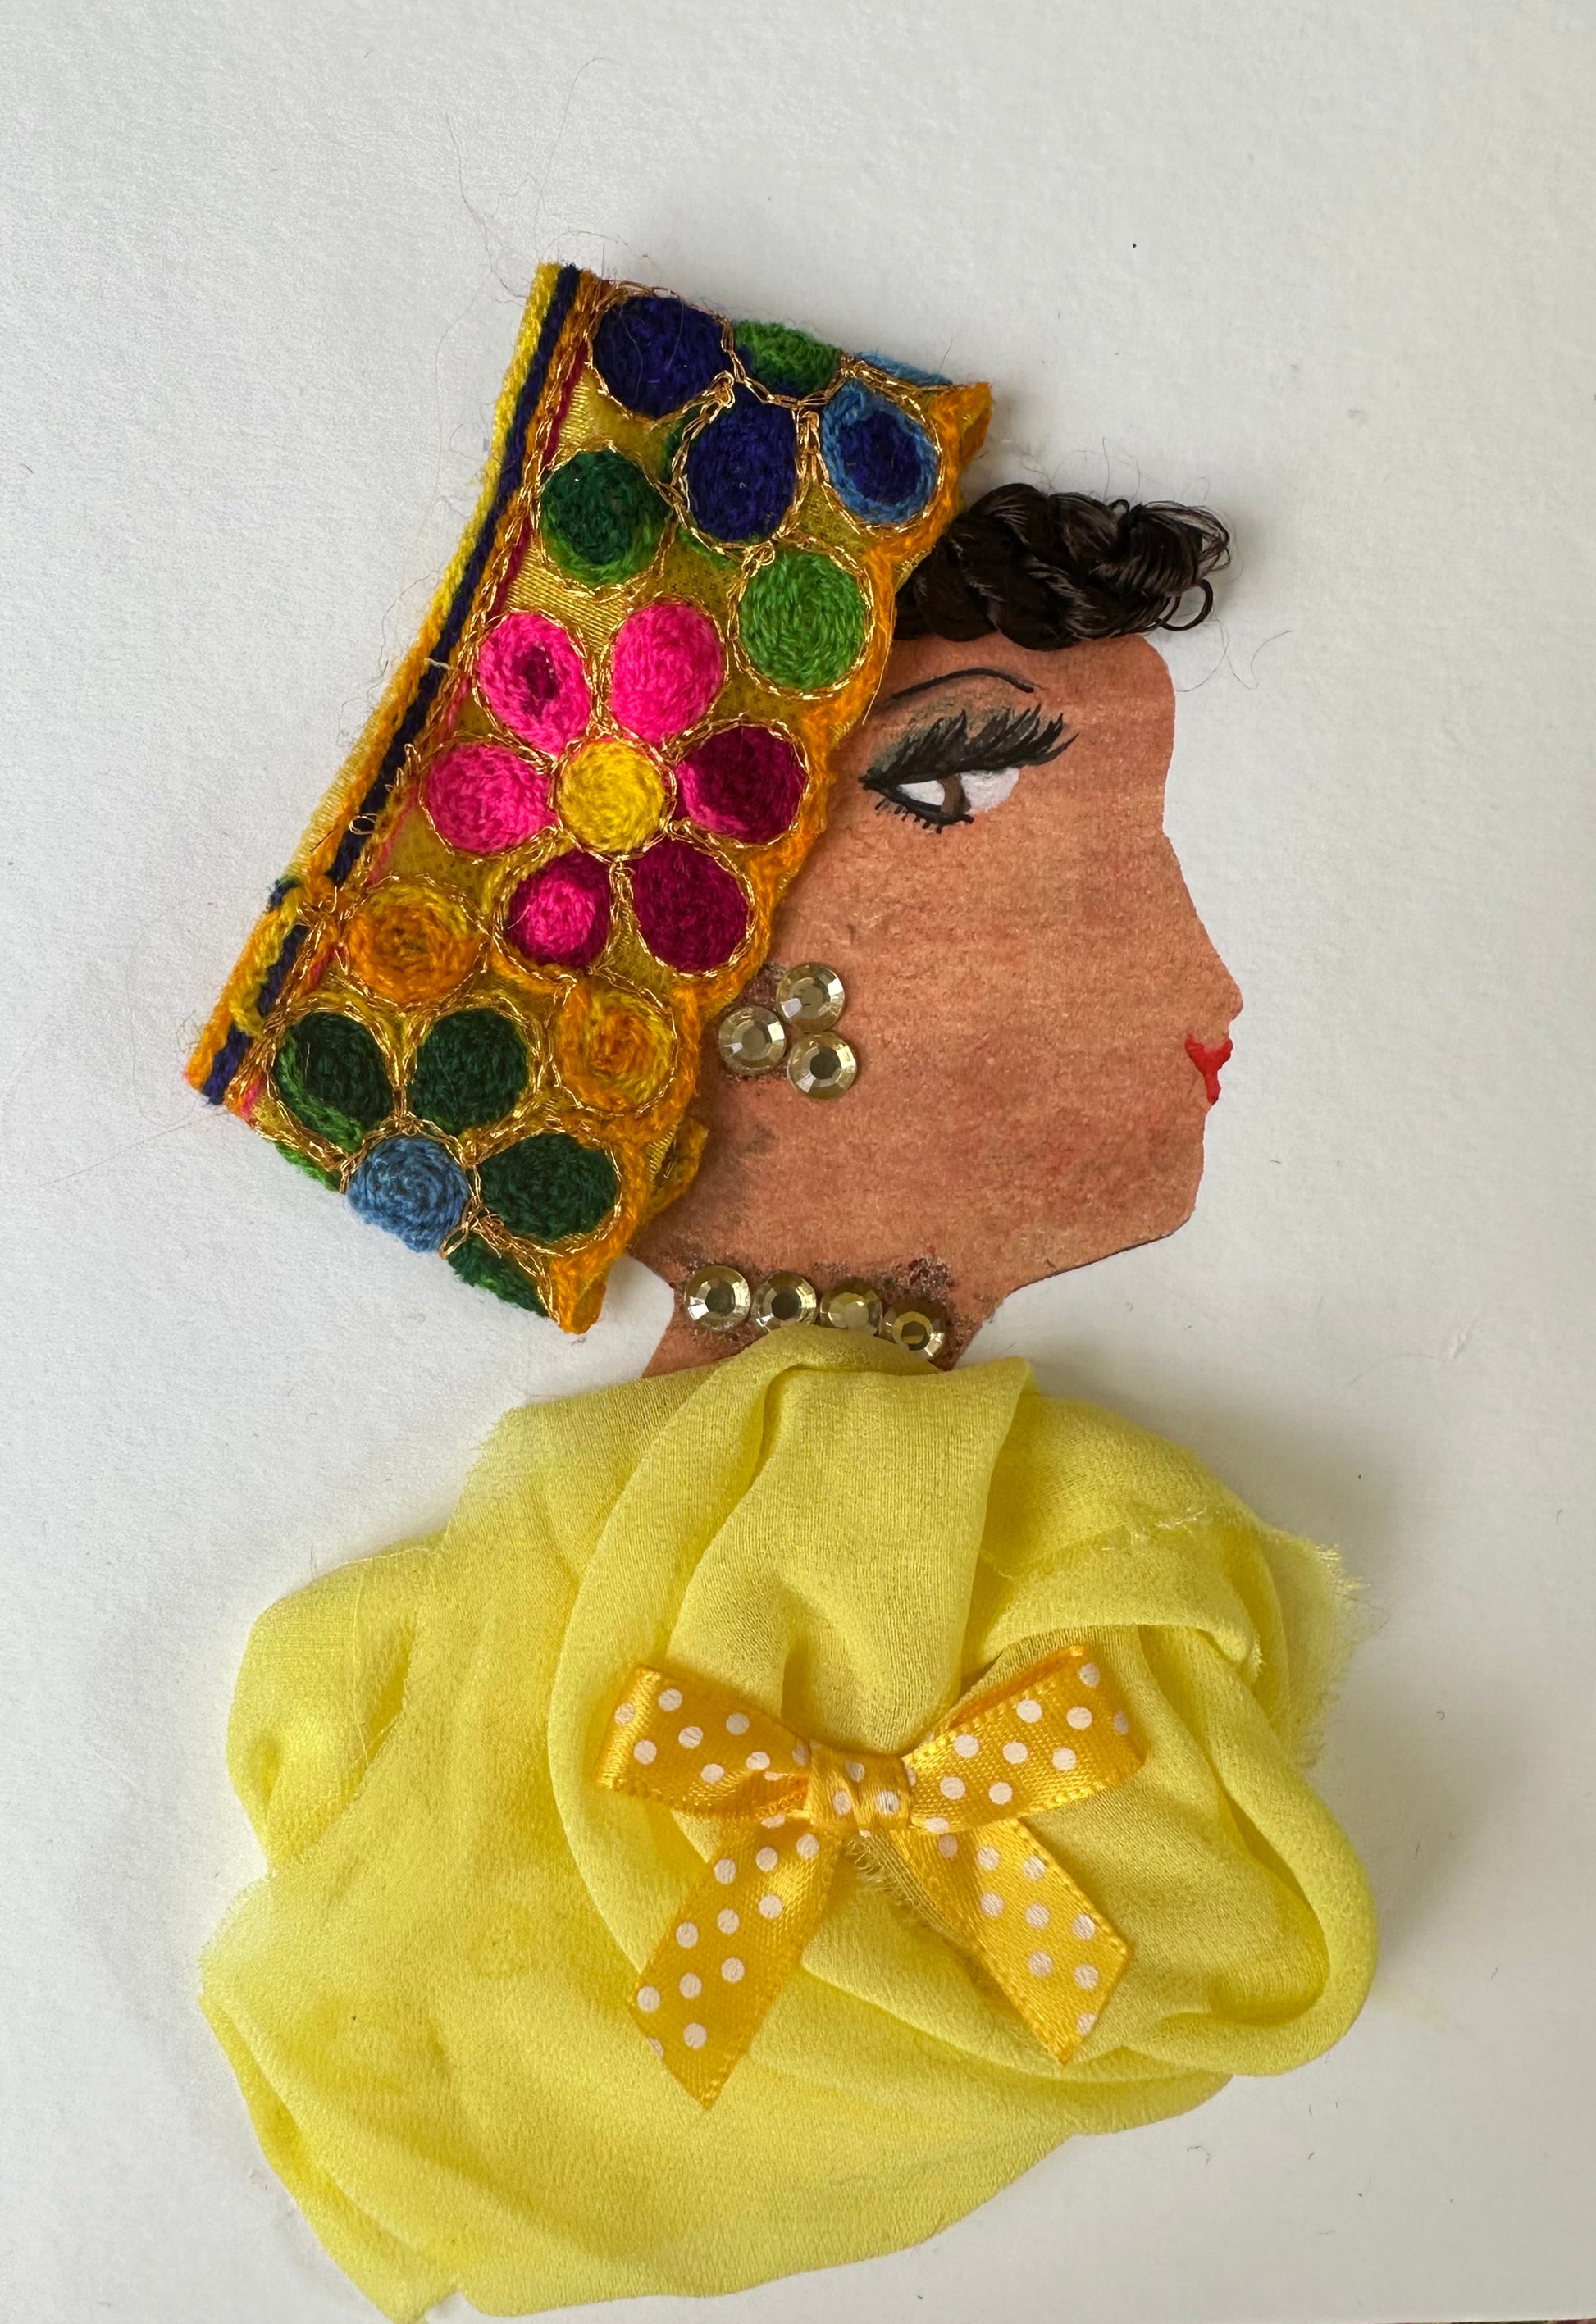 I designed this handmade card of a woman dressed in a yellow blouse that is pinned together with a yellow bow. She is wearing a headband with three flowers; one is green, one is pink, one is blue. The headband has a yellow background to match the blouse and touches her gemstone jewellery.